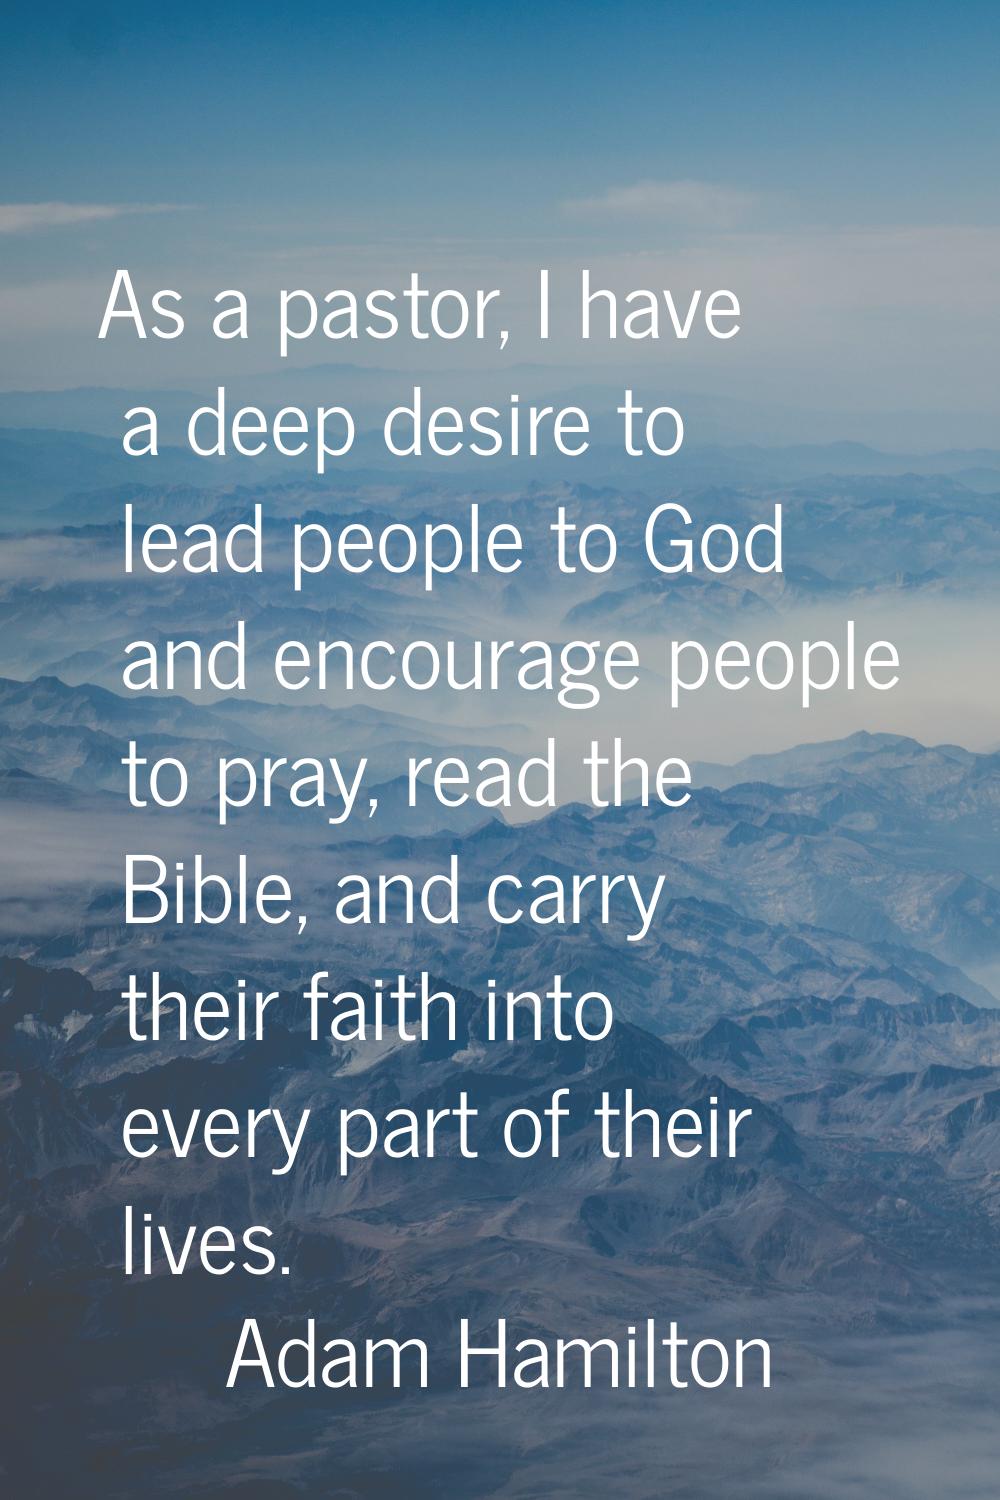 As a pastor, I have a deep desire to lead people to God and encourage people to pray, read the Bibl